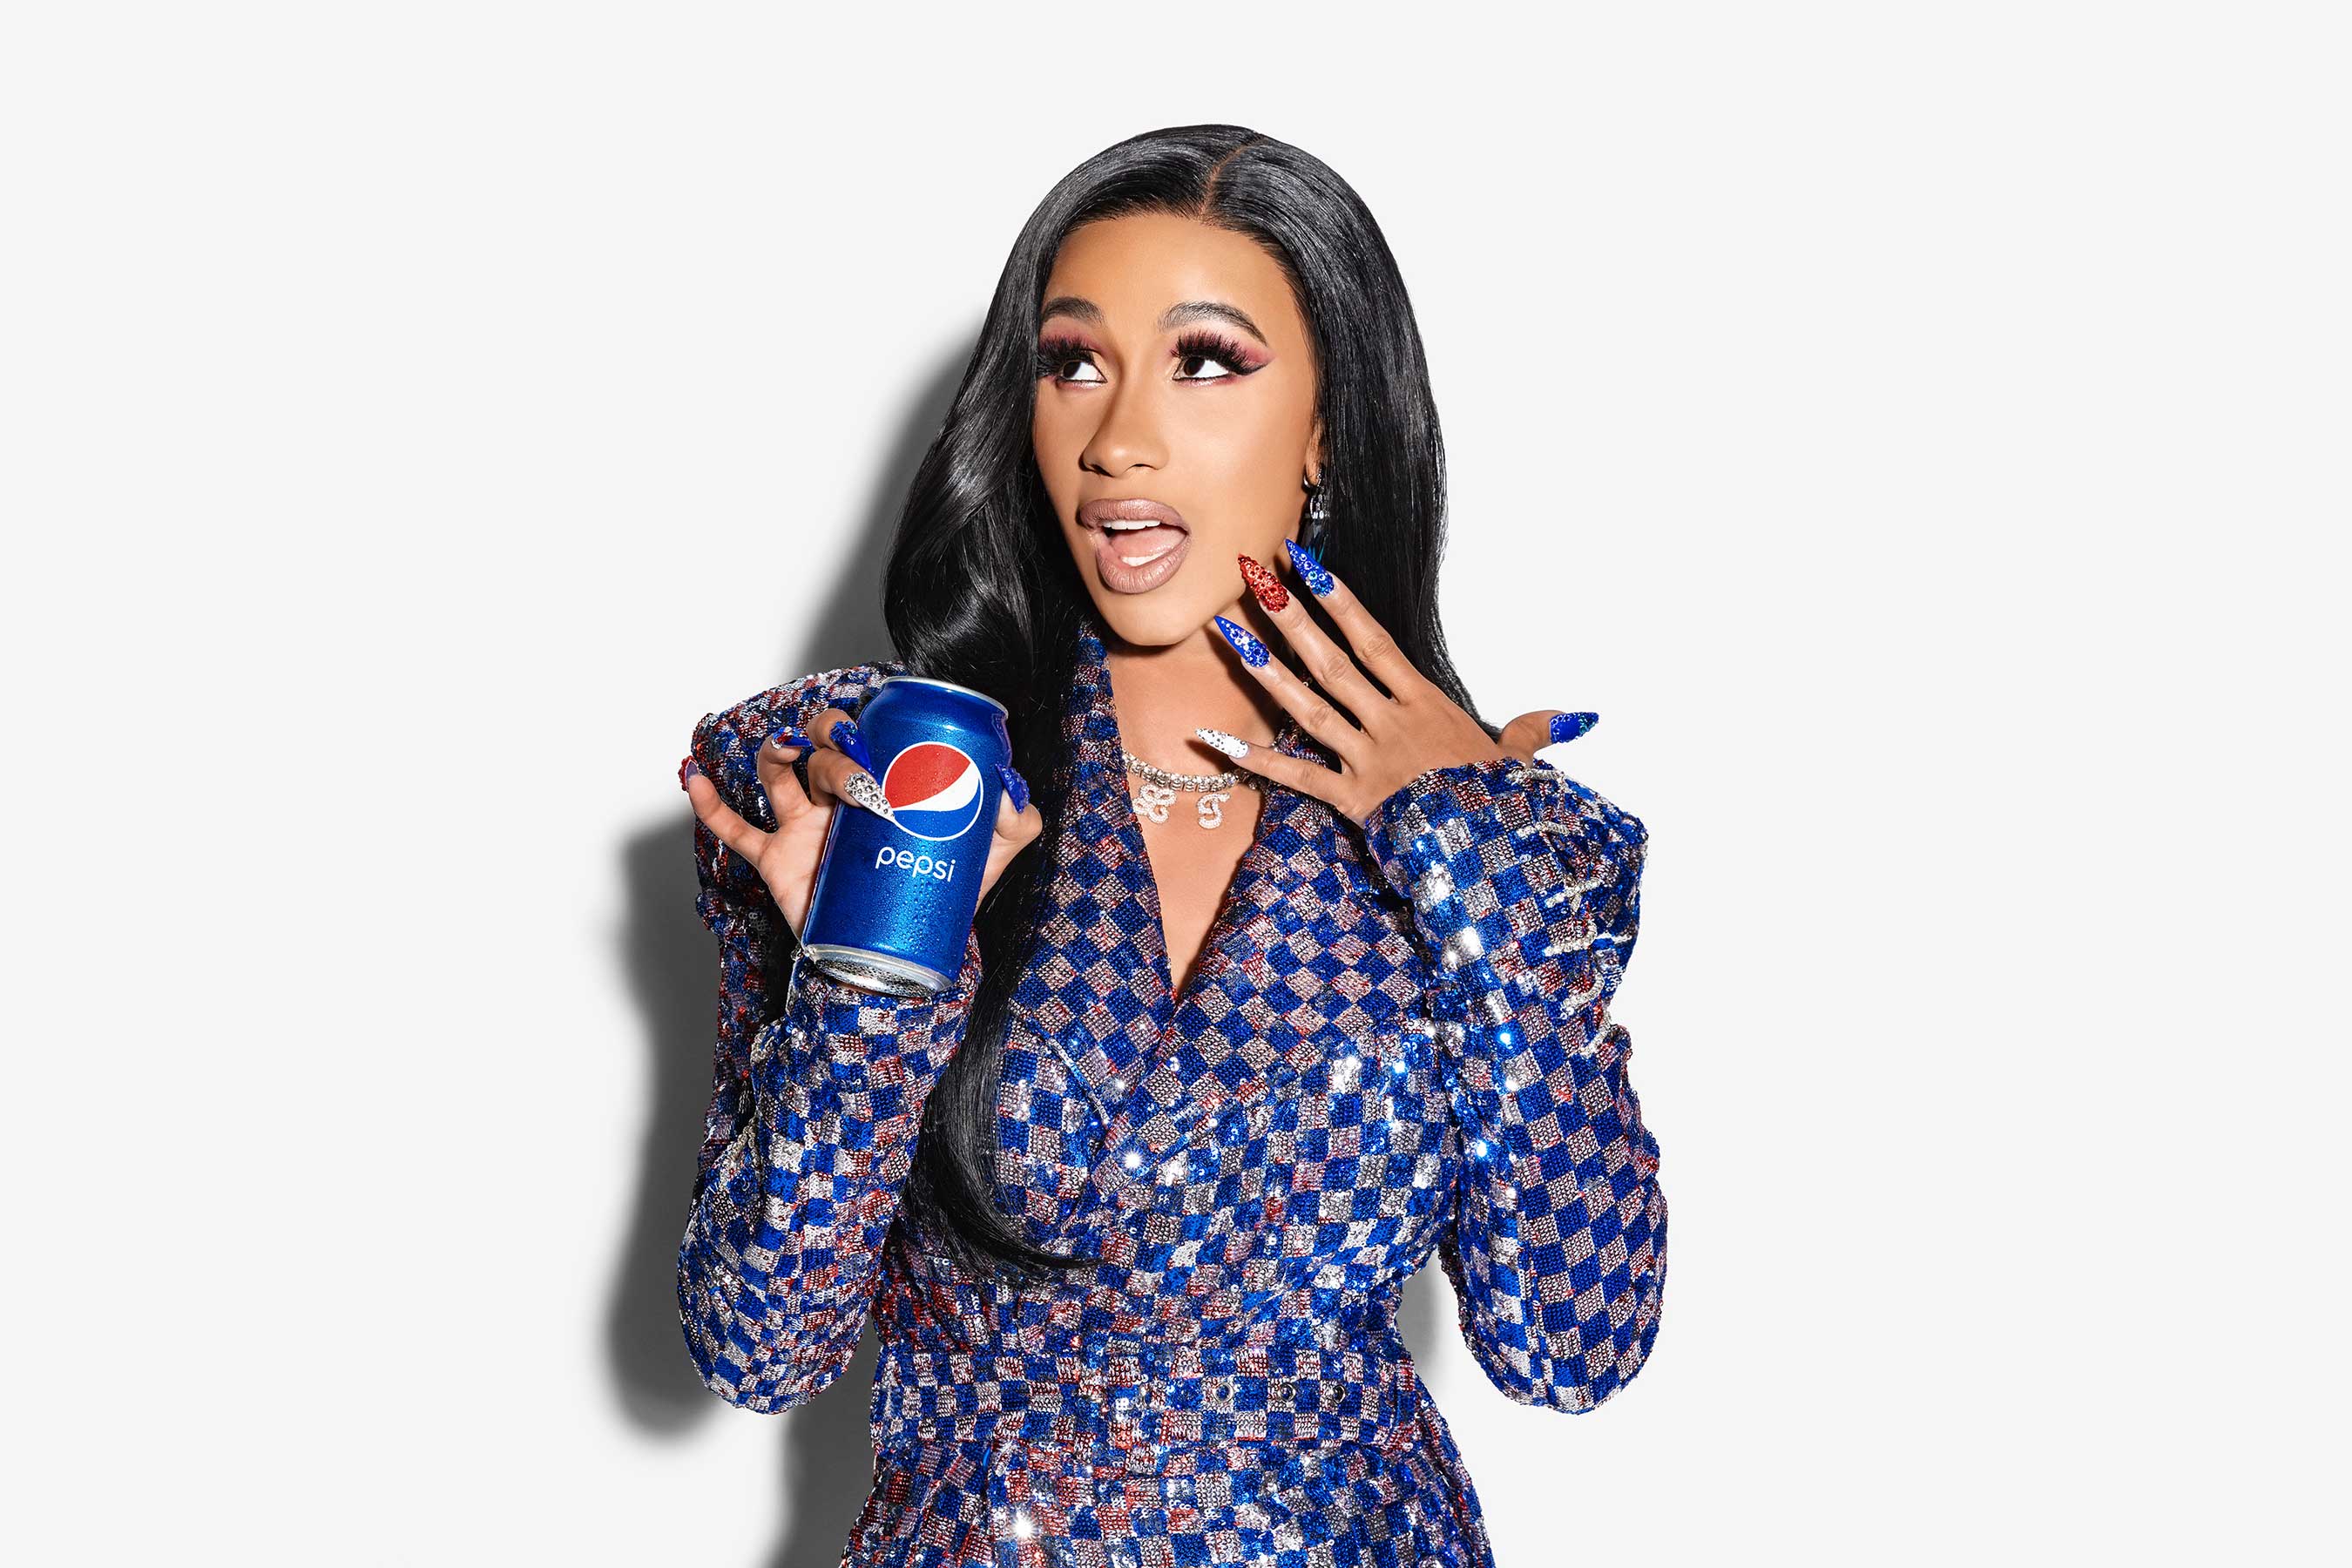 Cardi B. makes a cameo in Pepsi’s “More Than OK” Super Bowl commercial